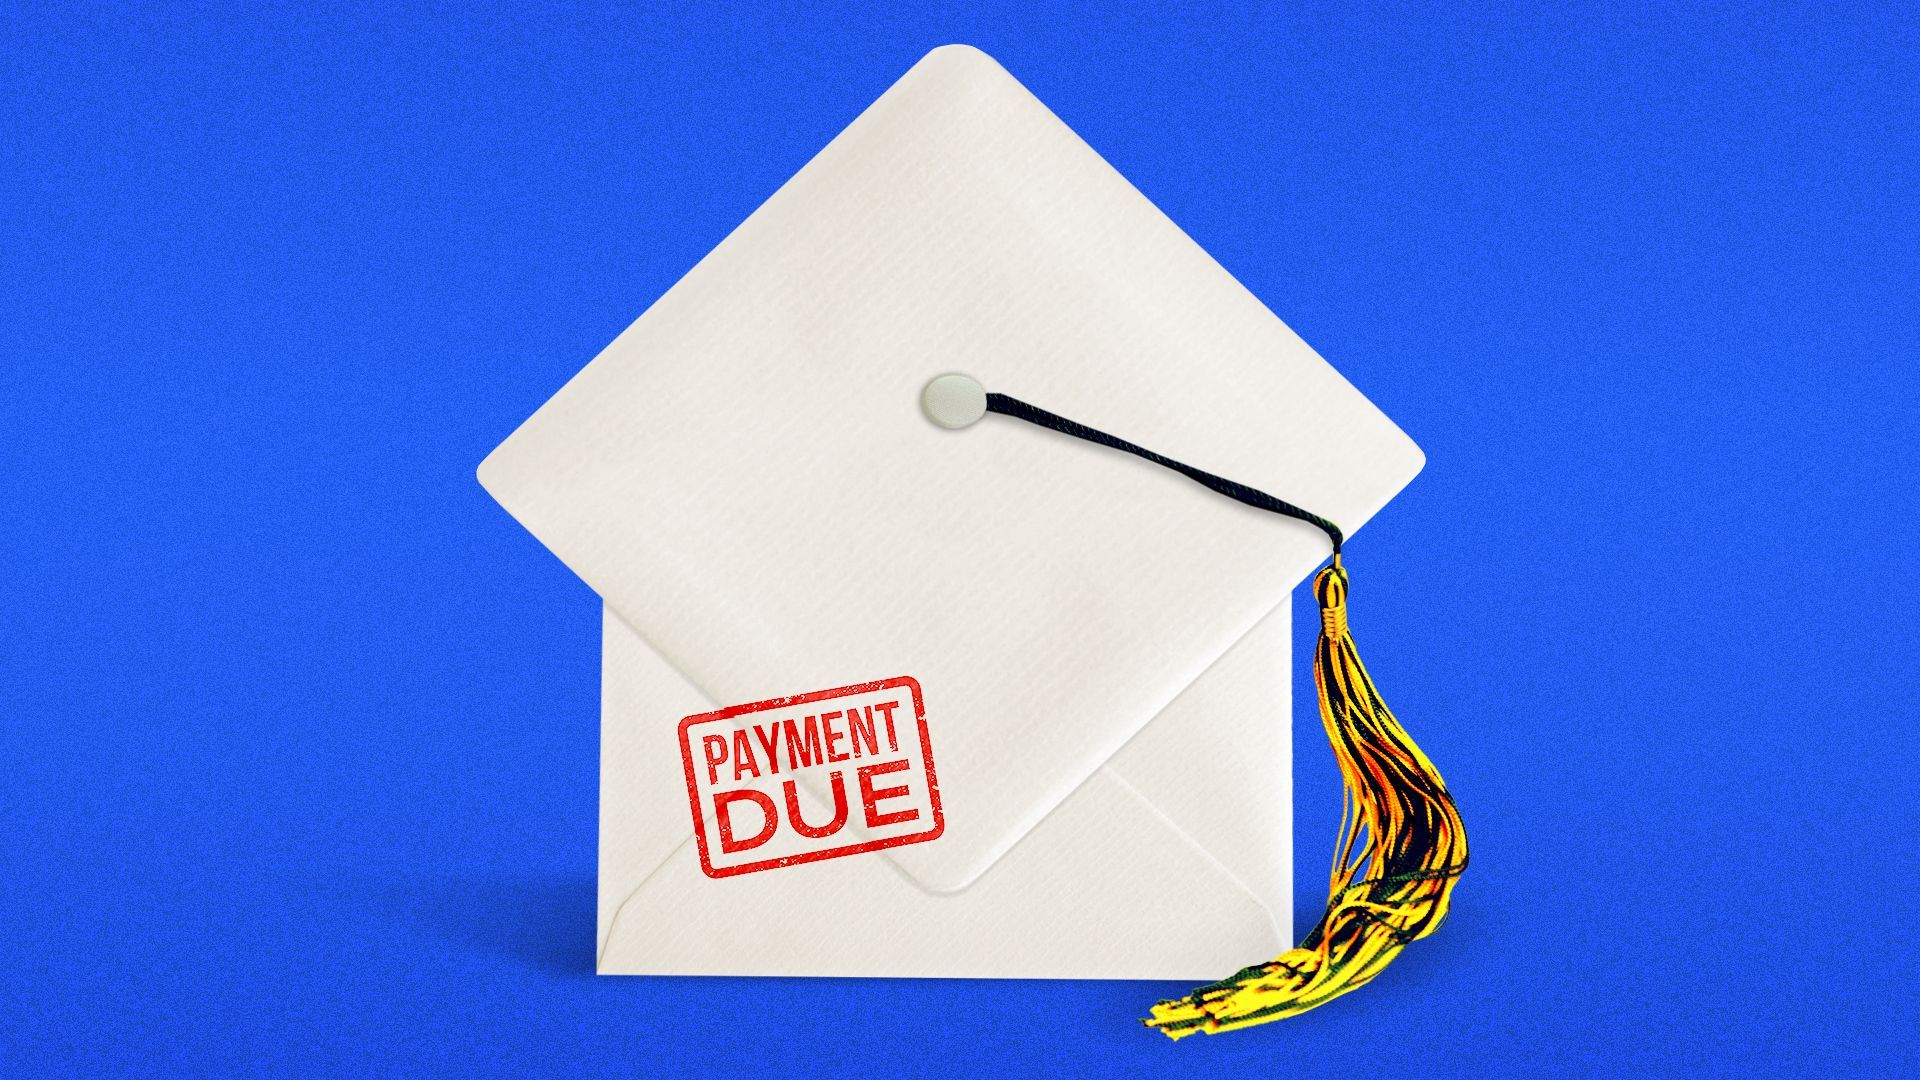 Illustration of an envelope, shaped like a graduation cap, stamped with a "payment due" notice